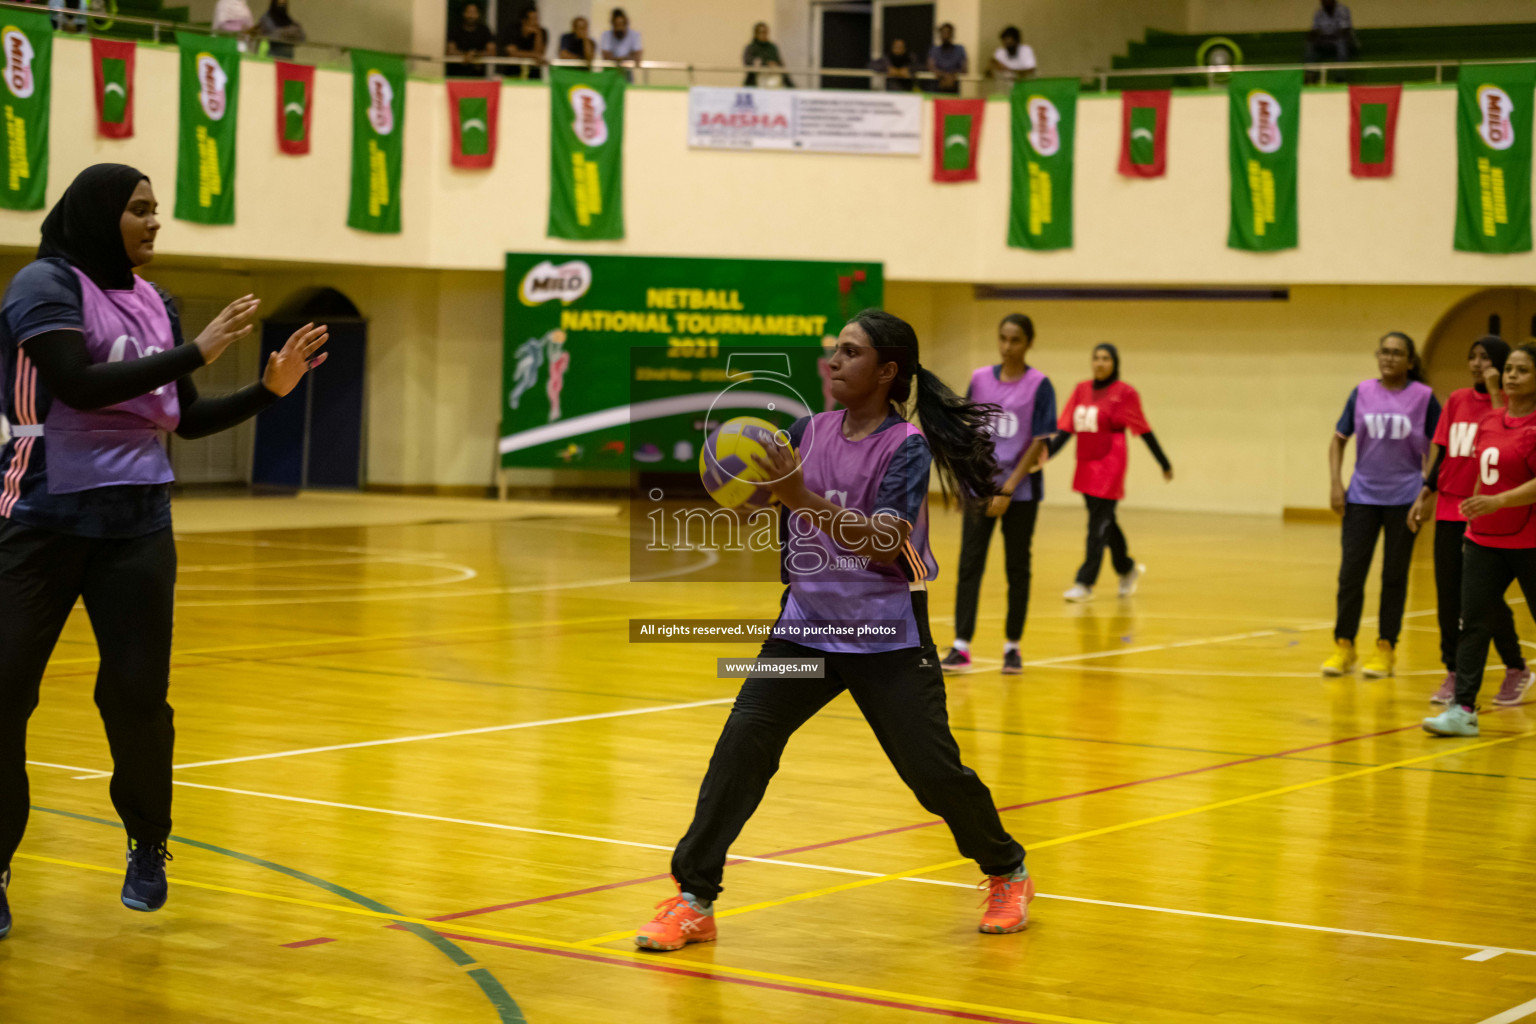 Milo National Netball Tournament 2021 held from 22 November to 05 December 2021 in Social Center Indoor Court, Male, Maldives